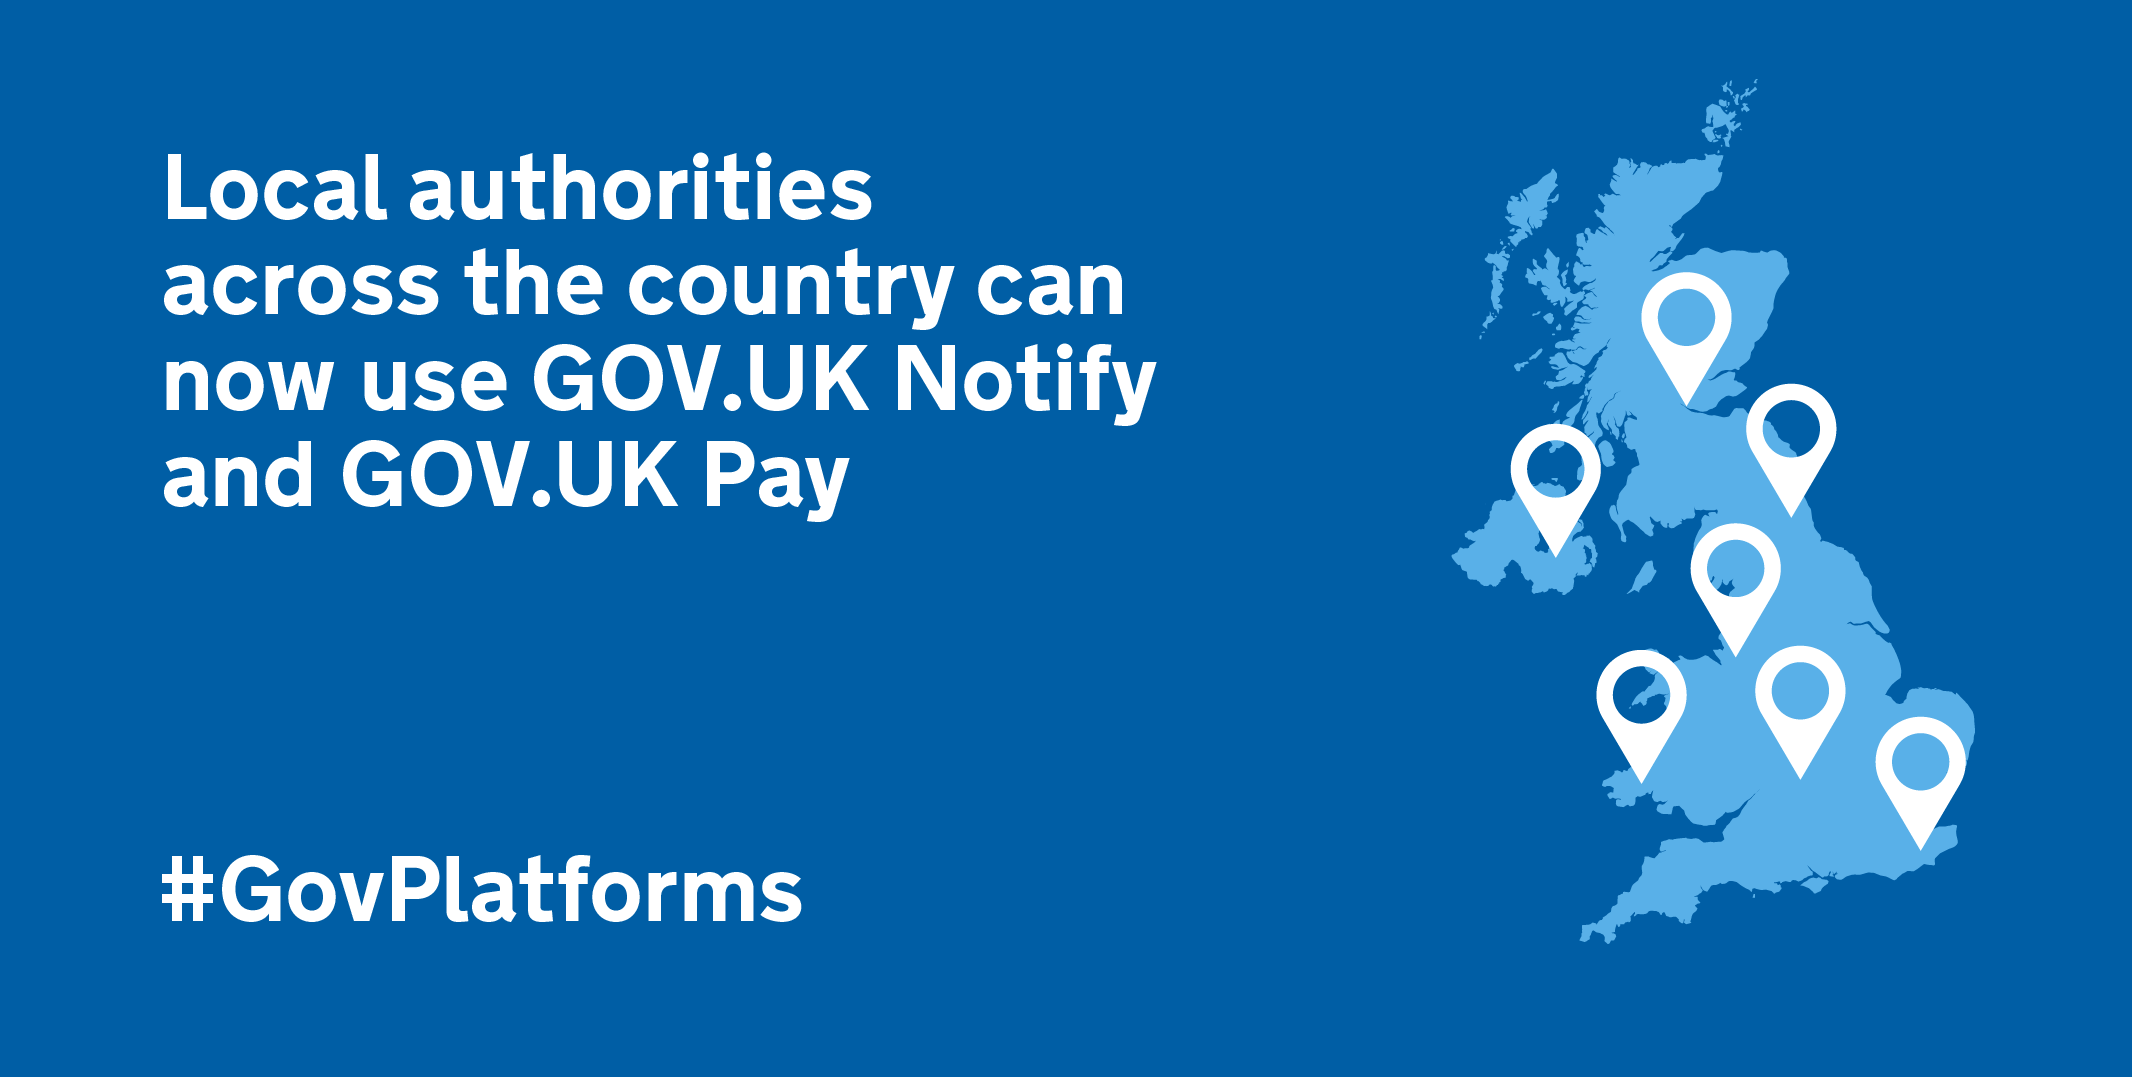 Image of a map of the UK and next to it is text 'Local authorities around the country can now use GOV.UK Notify and GOV.UK Pay' 